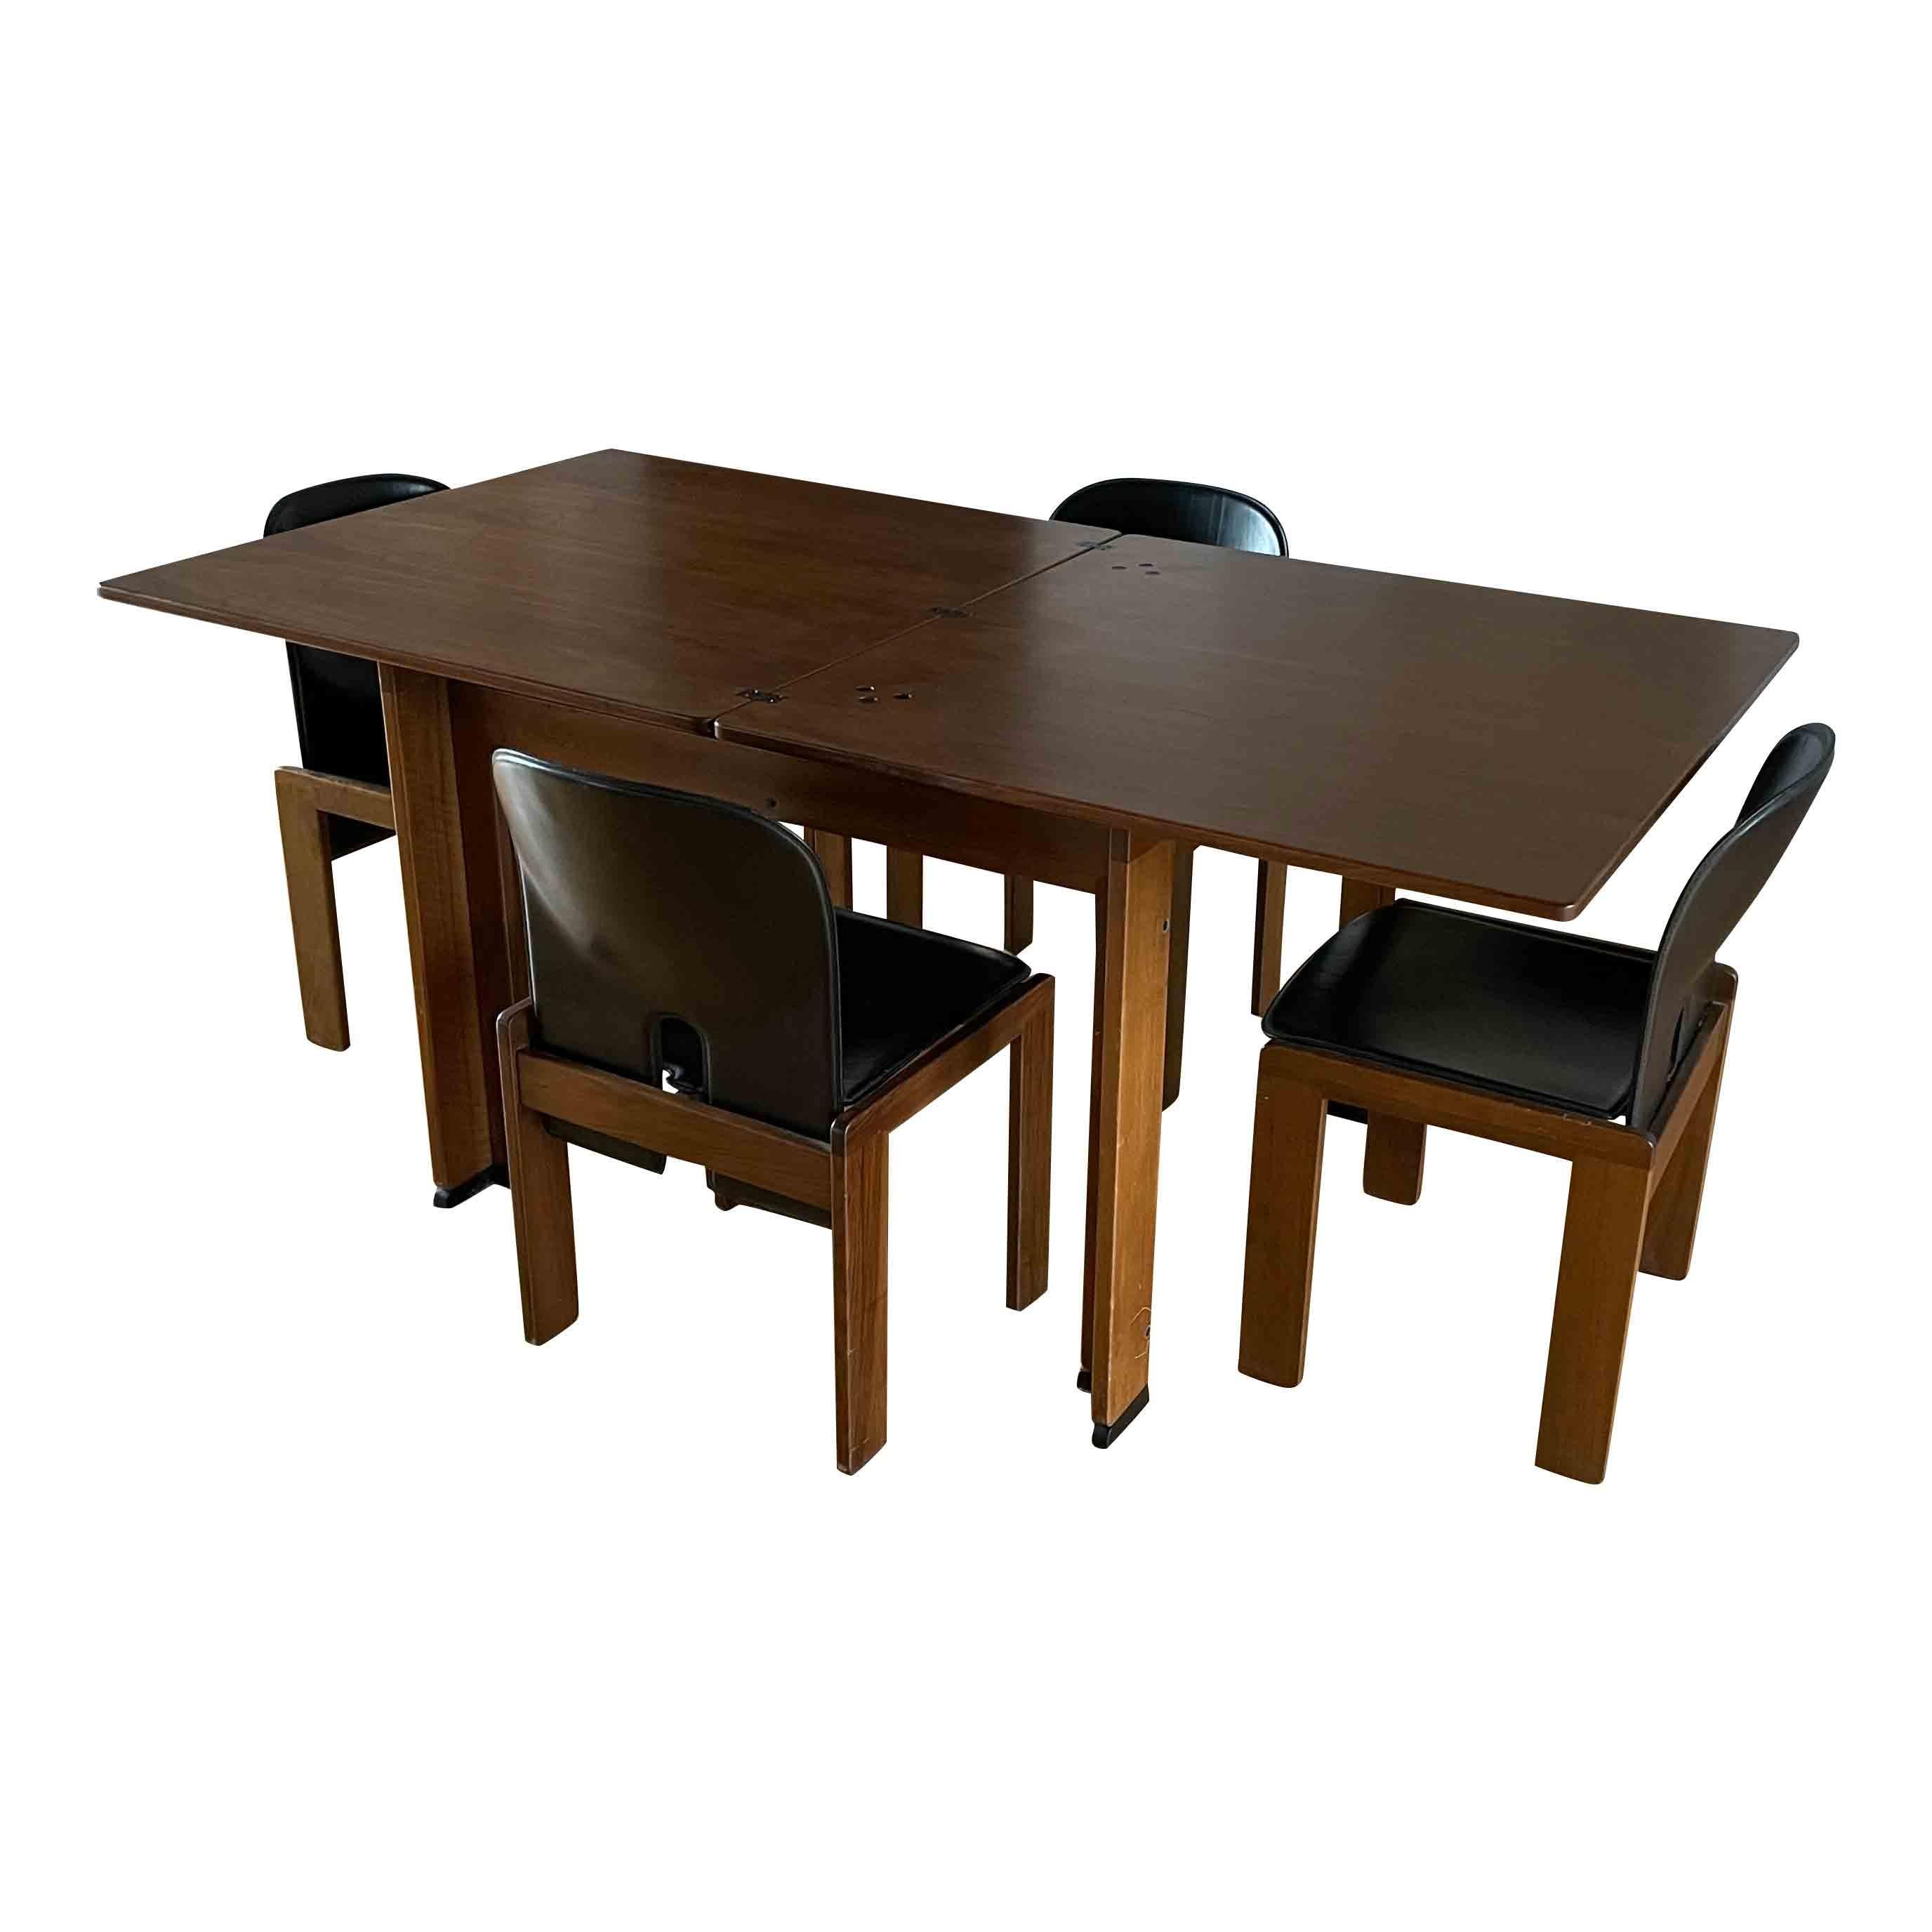 Afra & Tobia Scarpa Midcentury “778” Extensible Dining Table for Cassina, 1967 For Sale 1